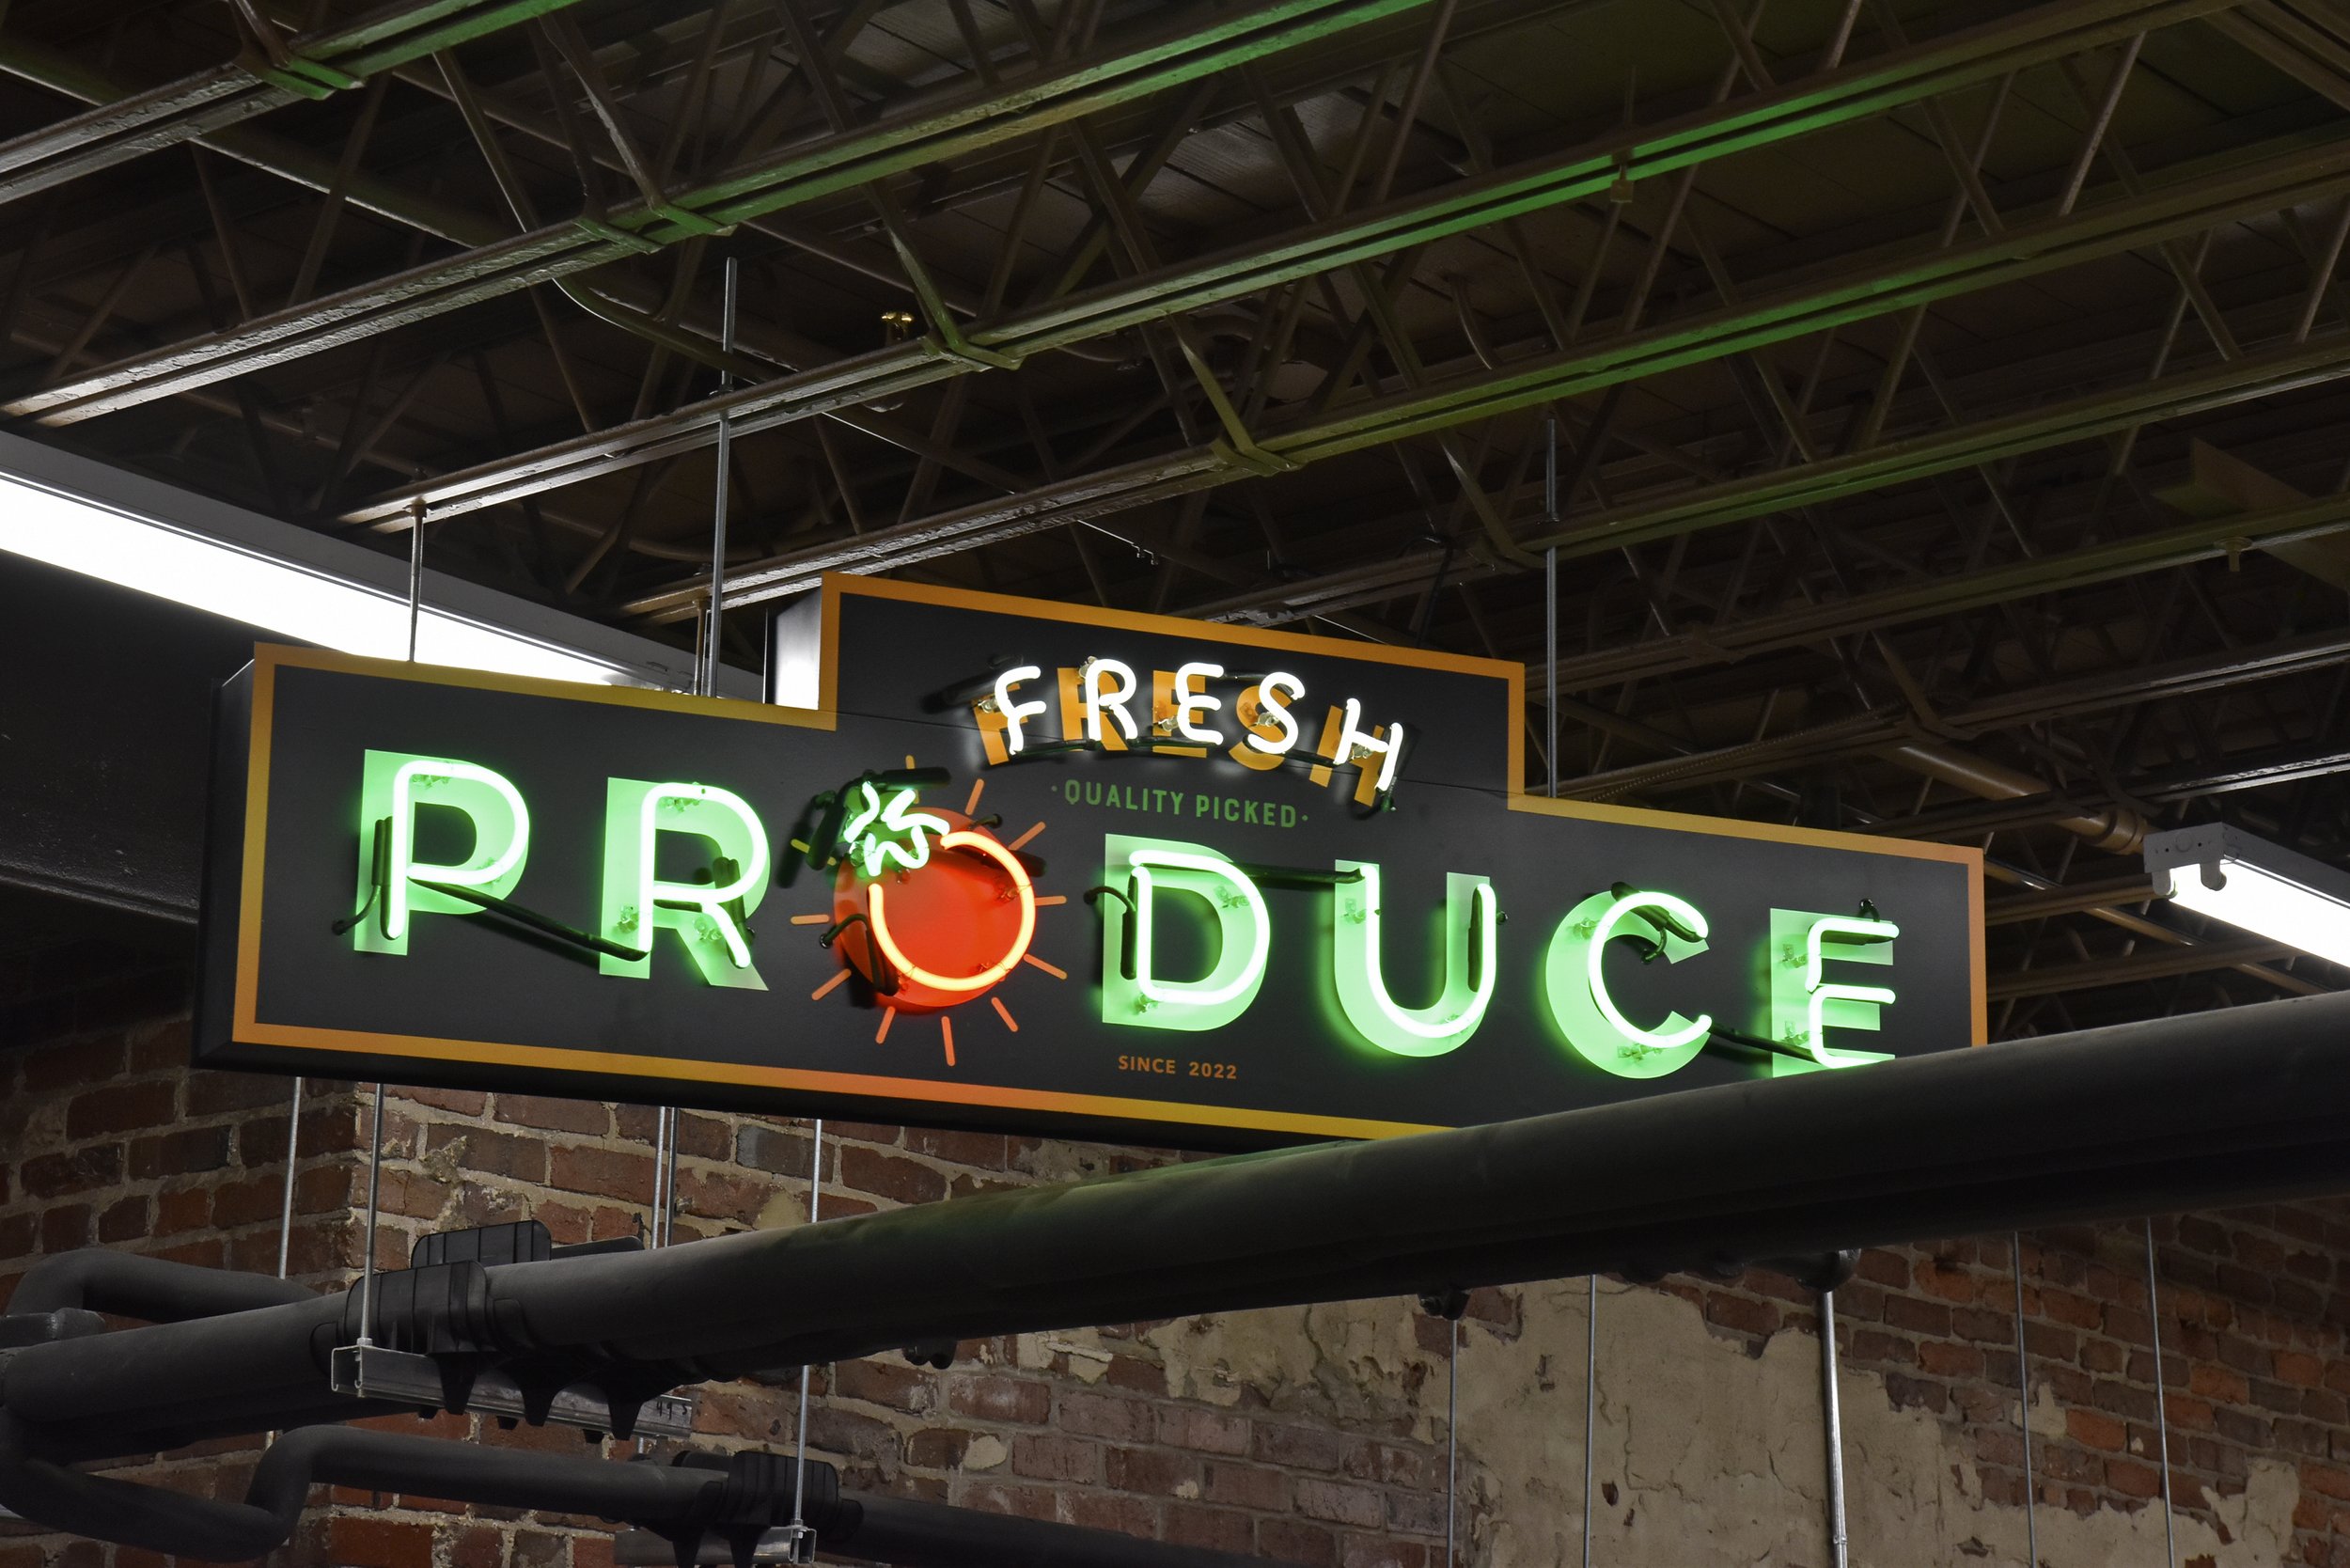  South Point Grocery  Downtown Memphis  “Fresh Produce” department neon sign  Branding creative and design by Chuck Mitchell  Sign fabrication and installation by Frank Balton Sign Company 